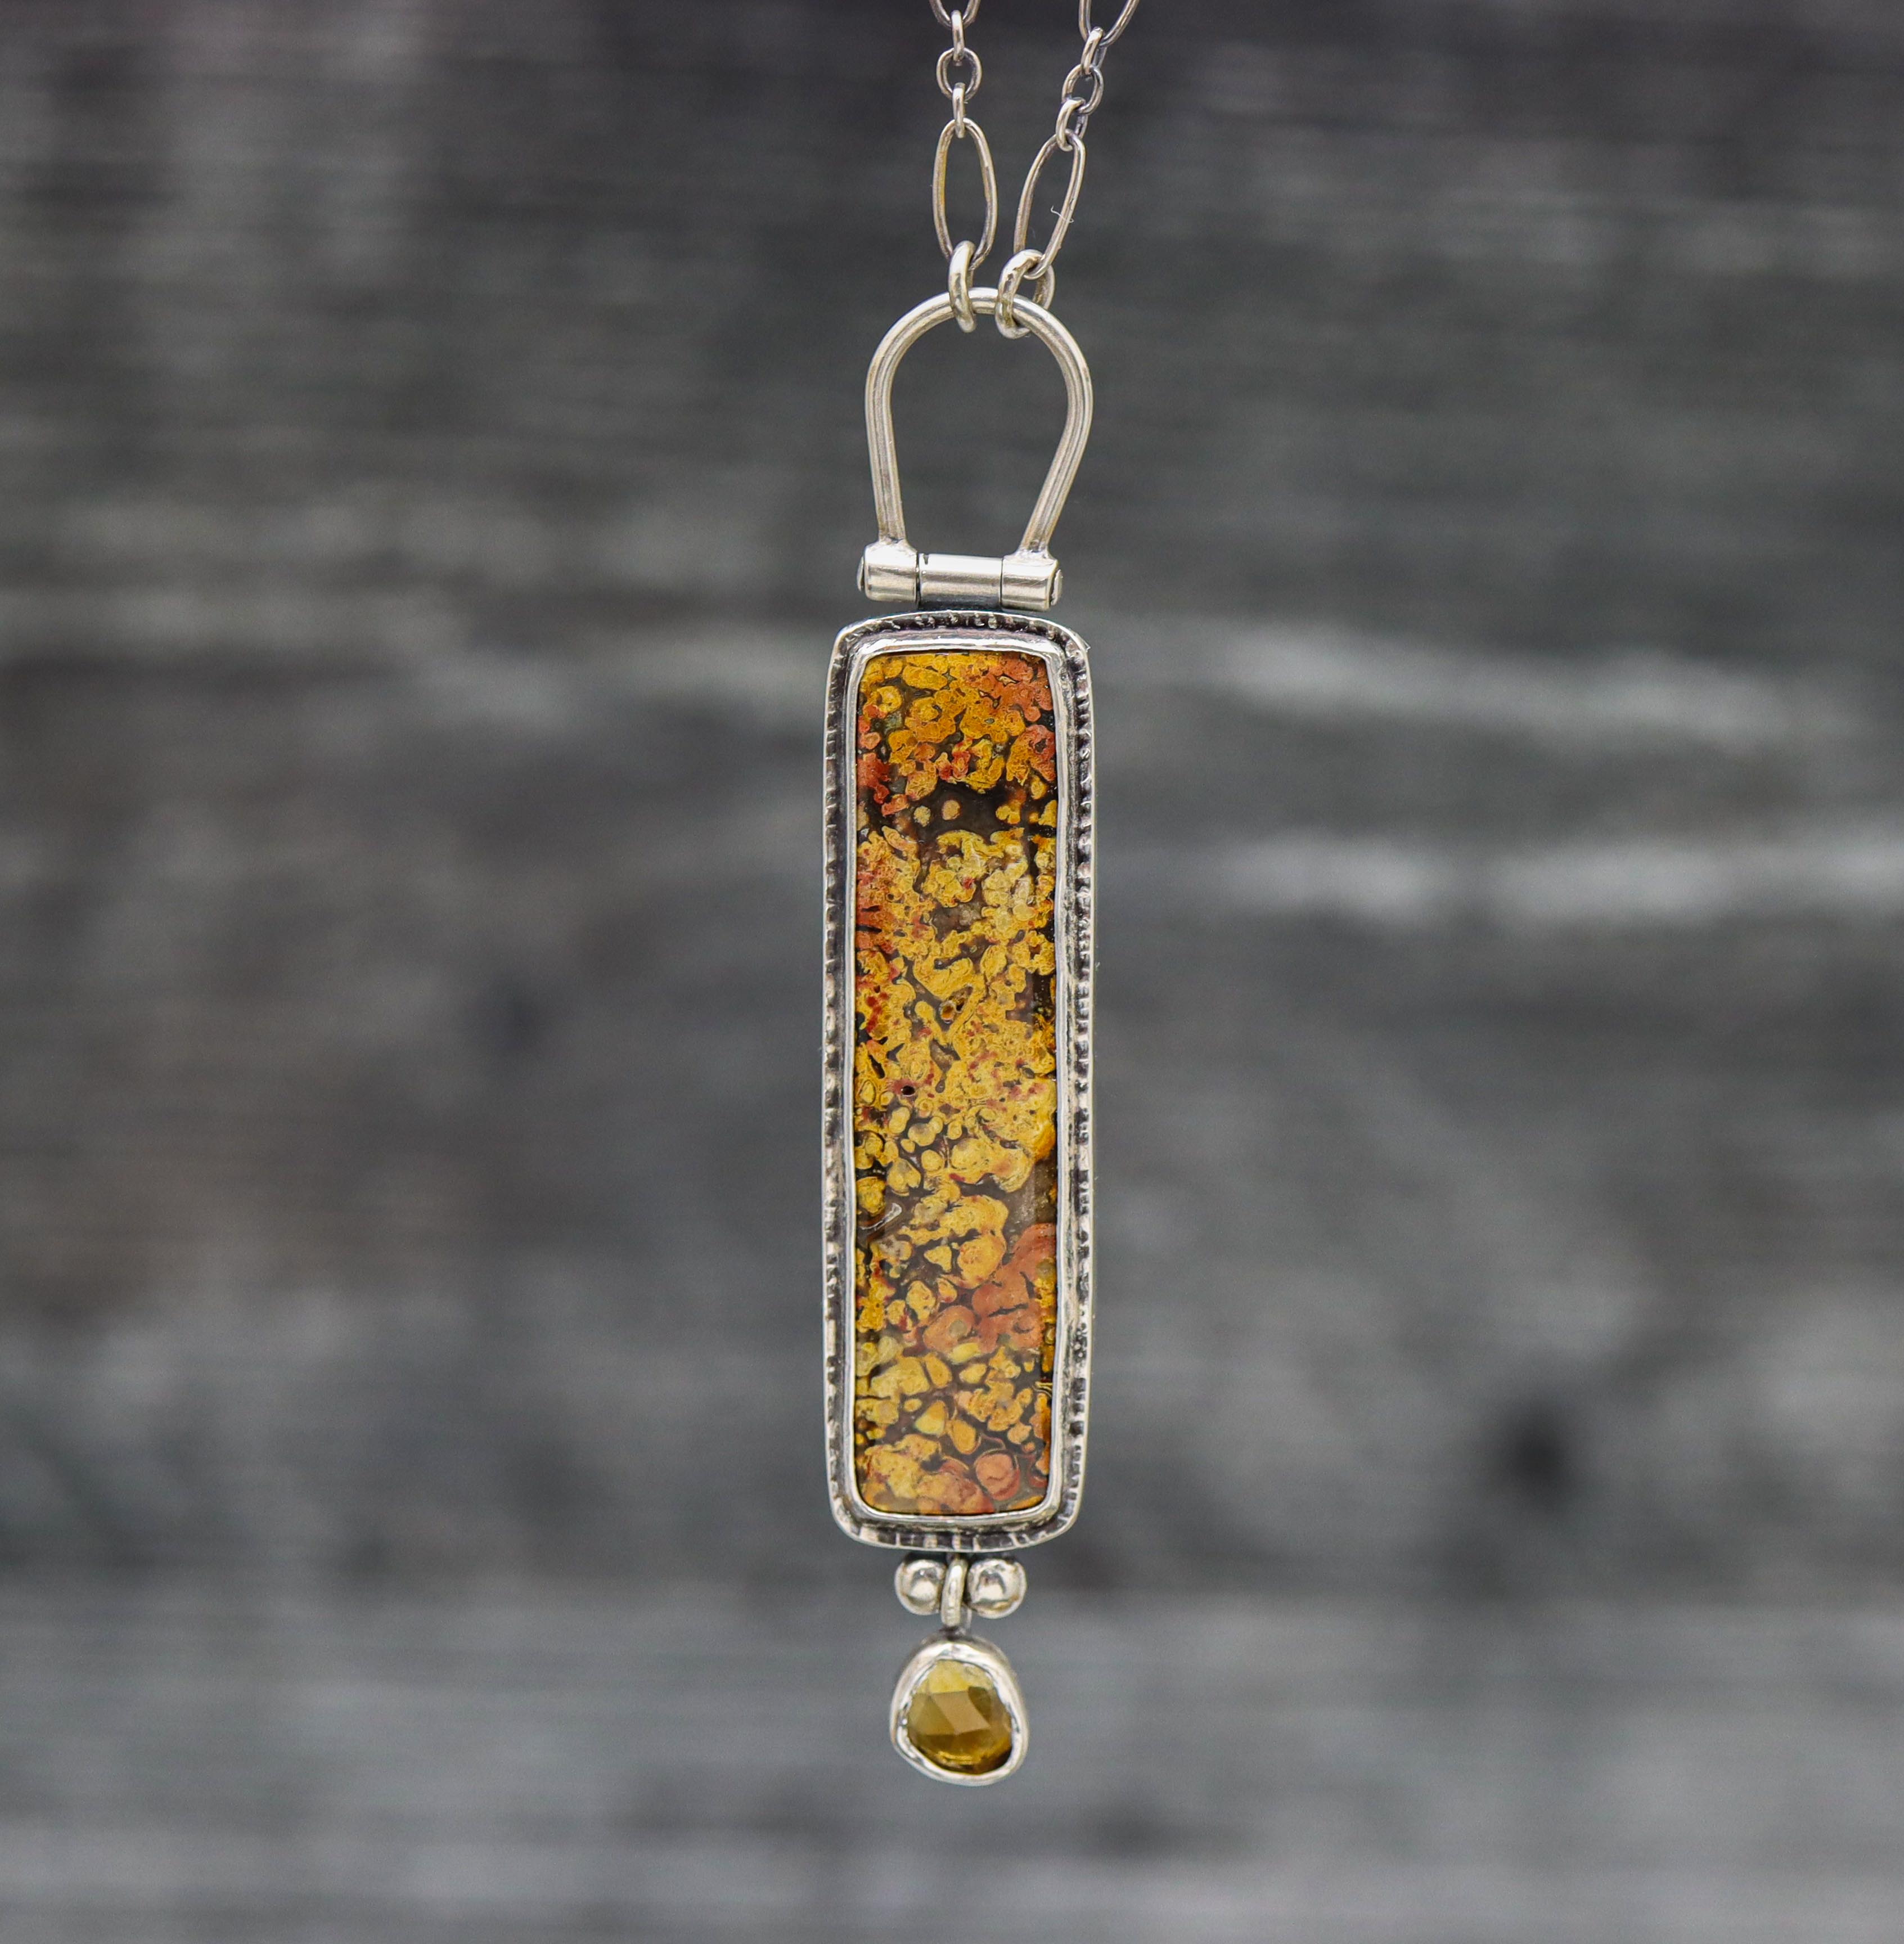 Plume Agate and Mandarine Citrine Pendant Sterling Silver One Of a Kind Gemstone Necklace